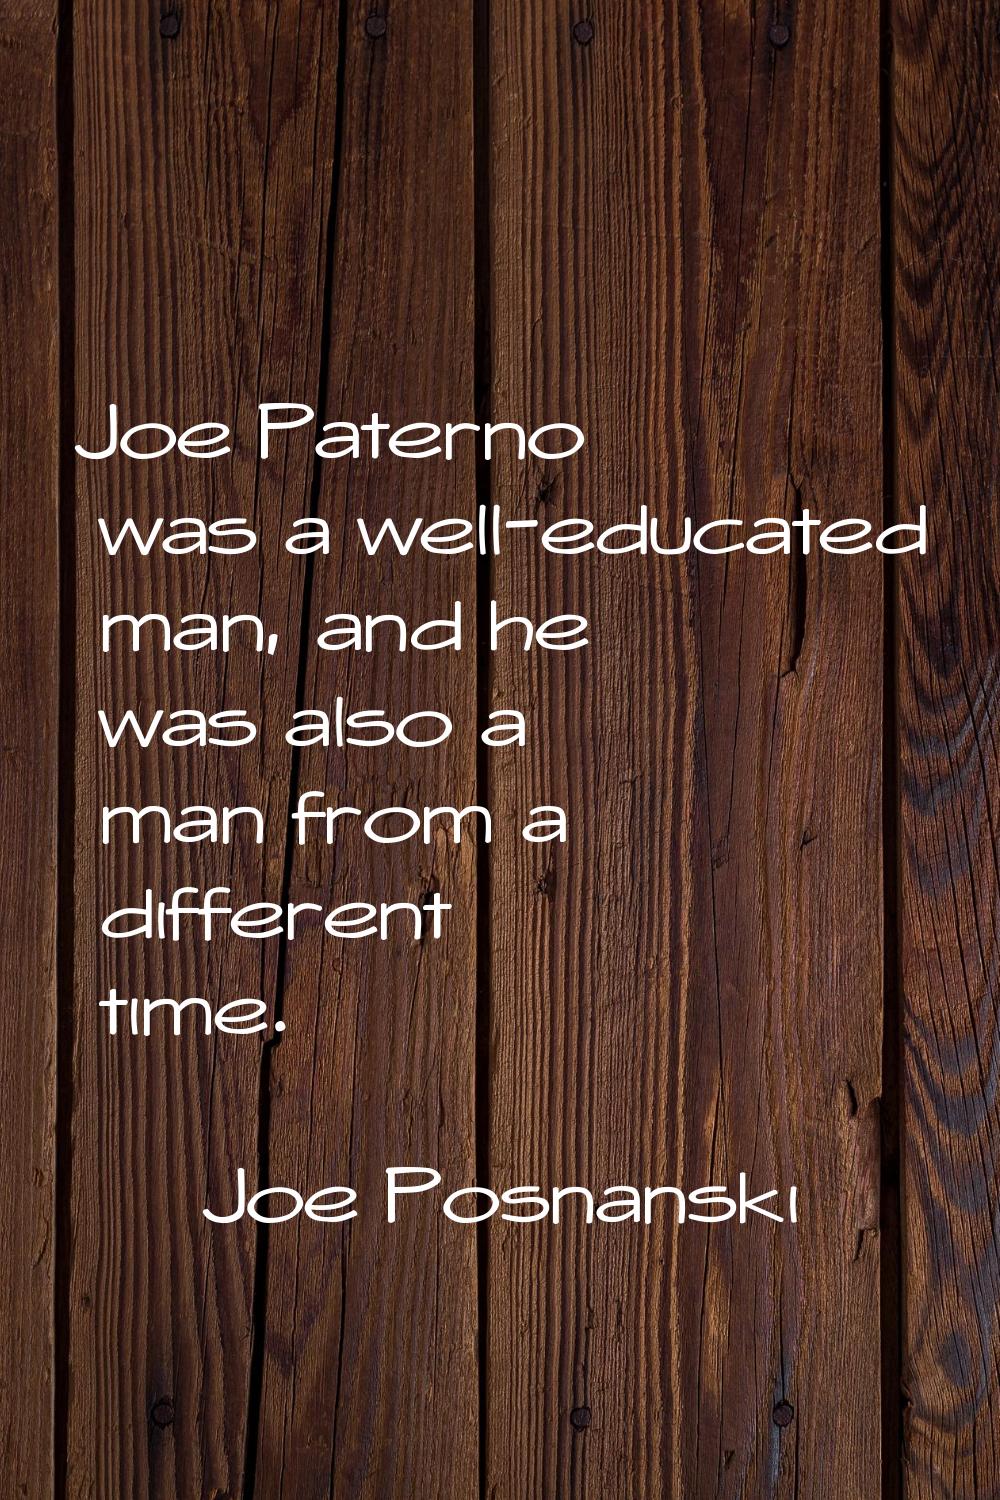 Joe Paterno was a well-educated man, and he was also a man from a different time.